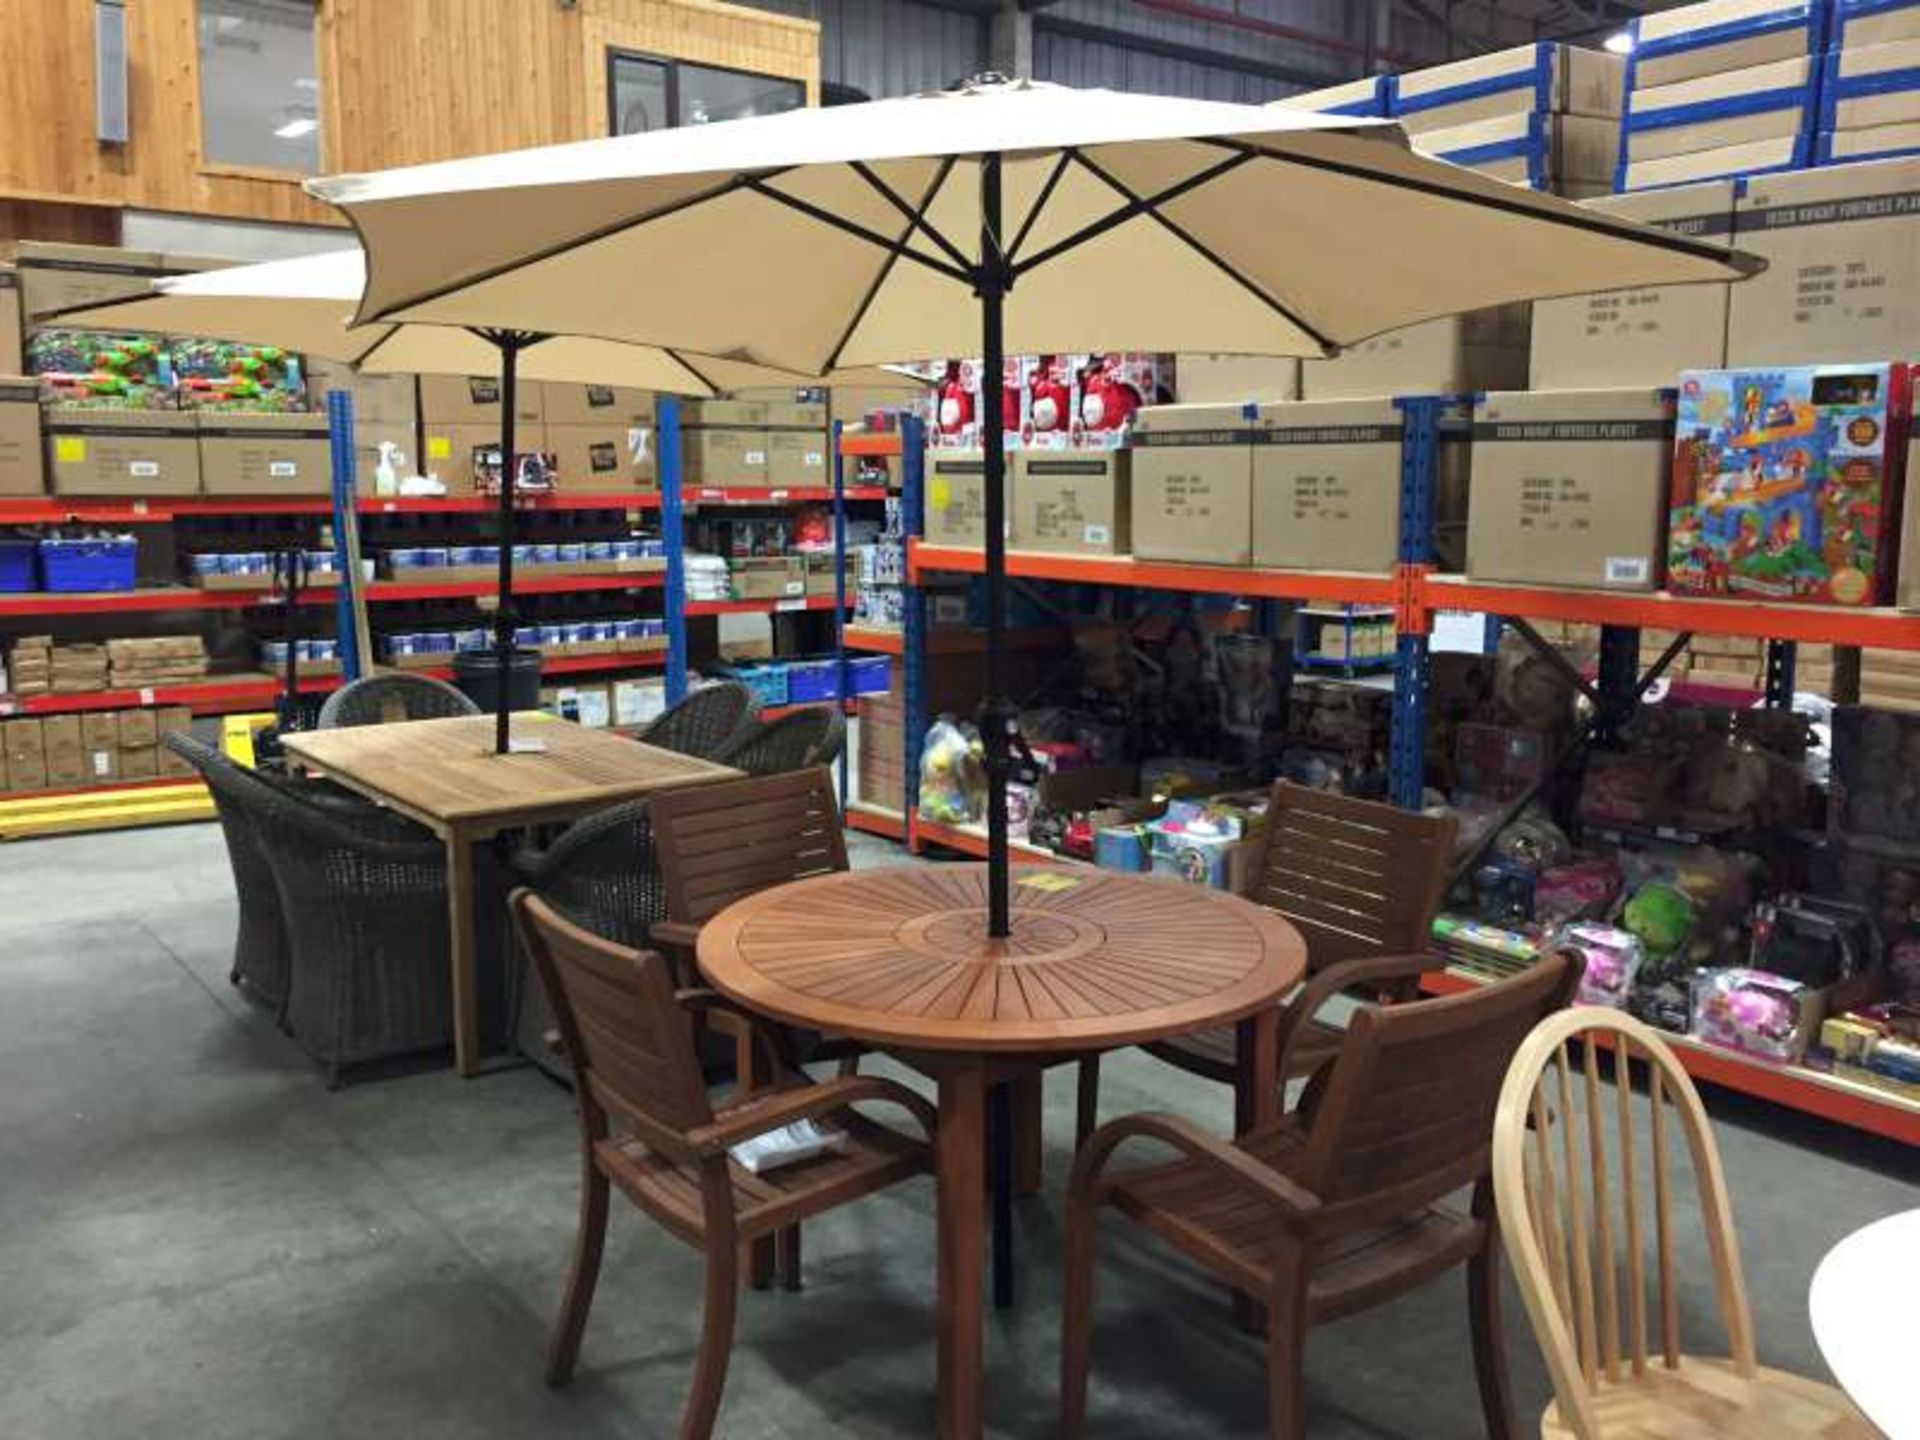 BRAND NEW BOXED ALMERIA ROUND GARDEN TABLE WITH 4 X ALMERIA STACKING CHAIRS AND PARASOL